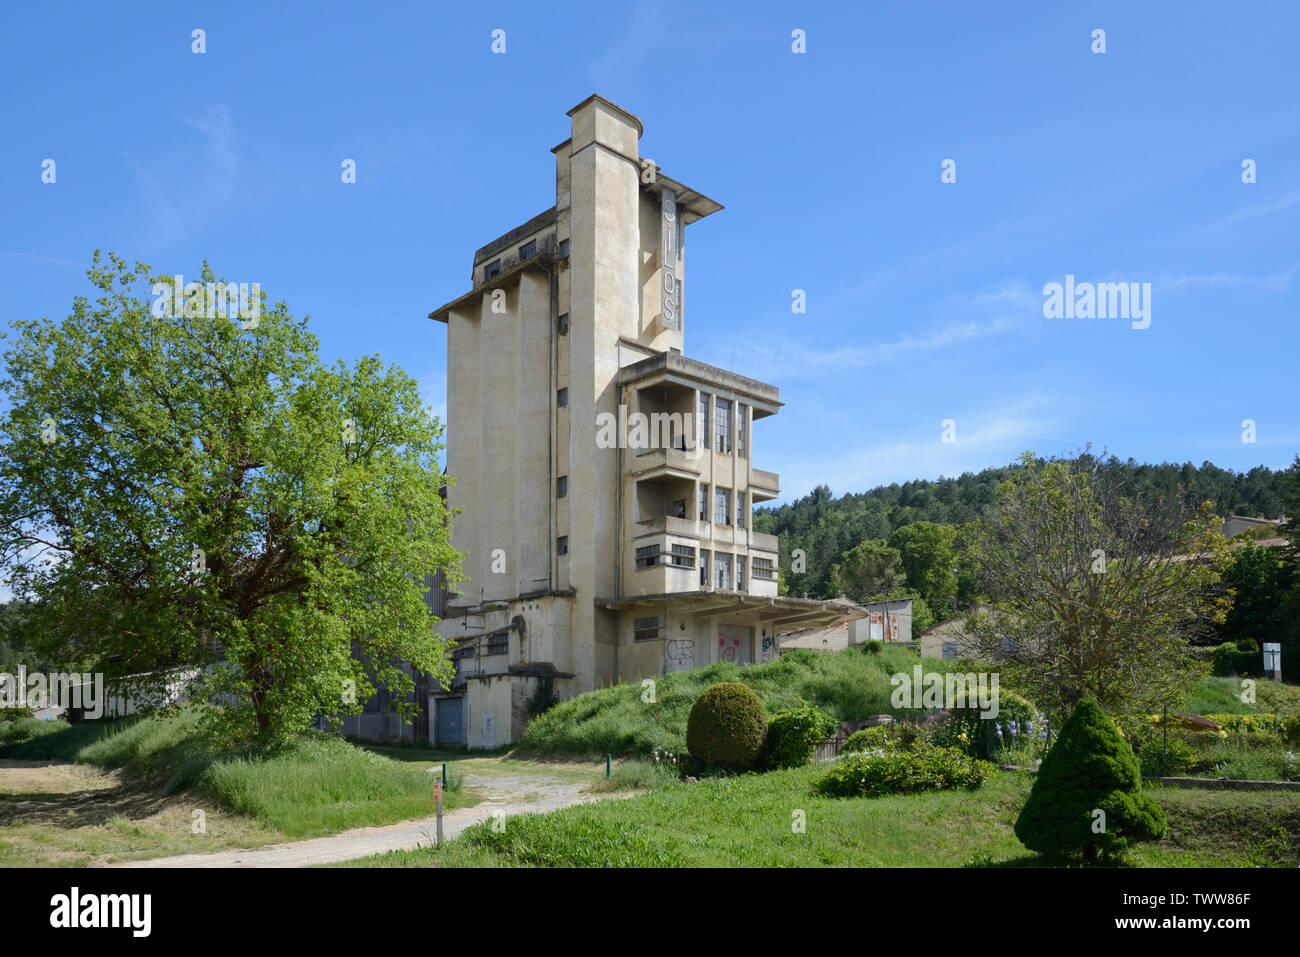 Abandoned and Vacant Grain Silo, built 1937-1938, now a Listed Building, Riez, Alpes-de-Haute-Provence Provence France Stock Photo